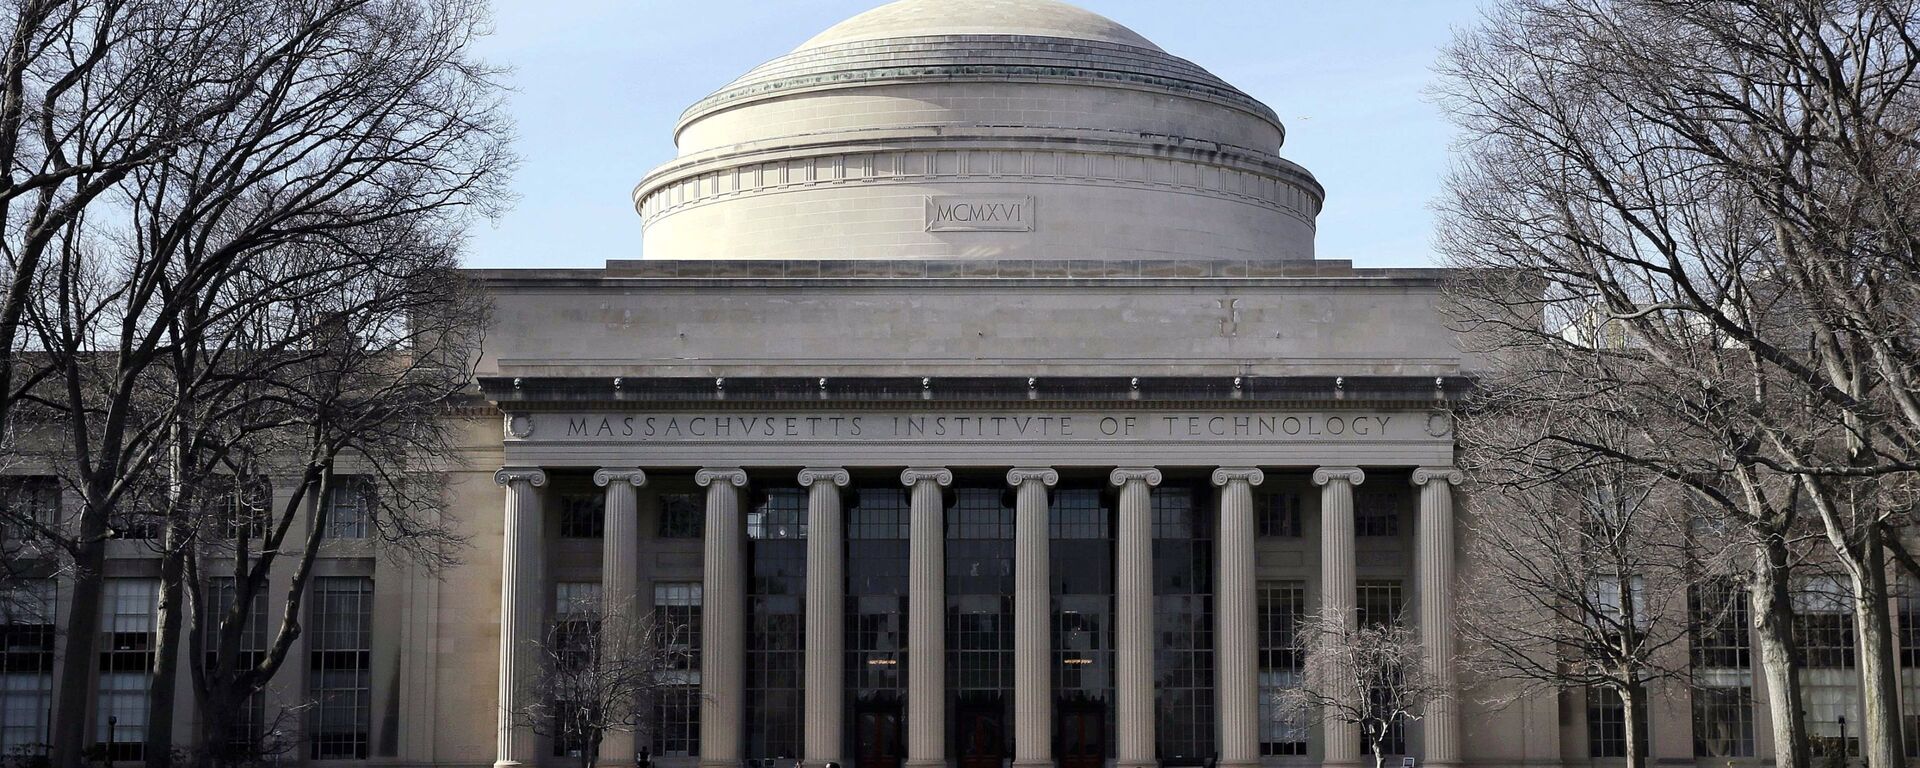 In this April 3, 2017 file photo, students walk past the Great Dome atop Building 10 on the Massachusetts Institute of Technology campus in Cambridge, Mass. - Sputnik International, 1920, 12.11.2021